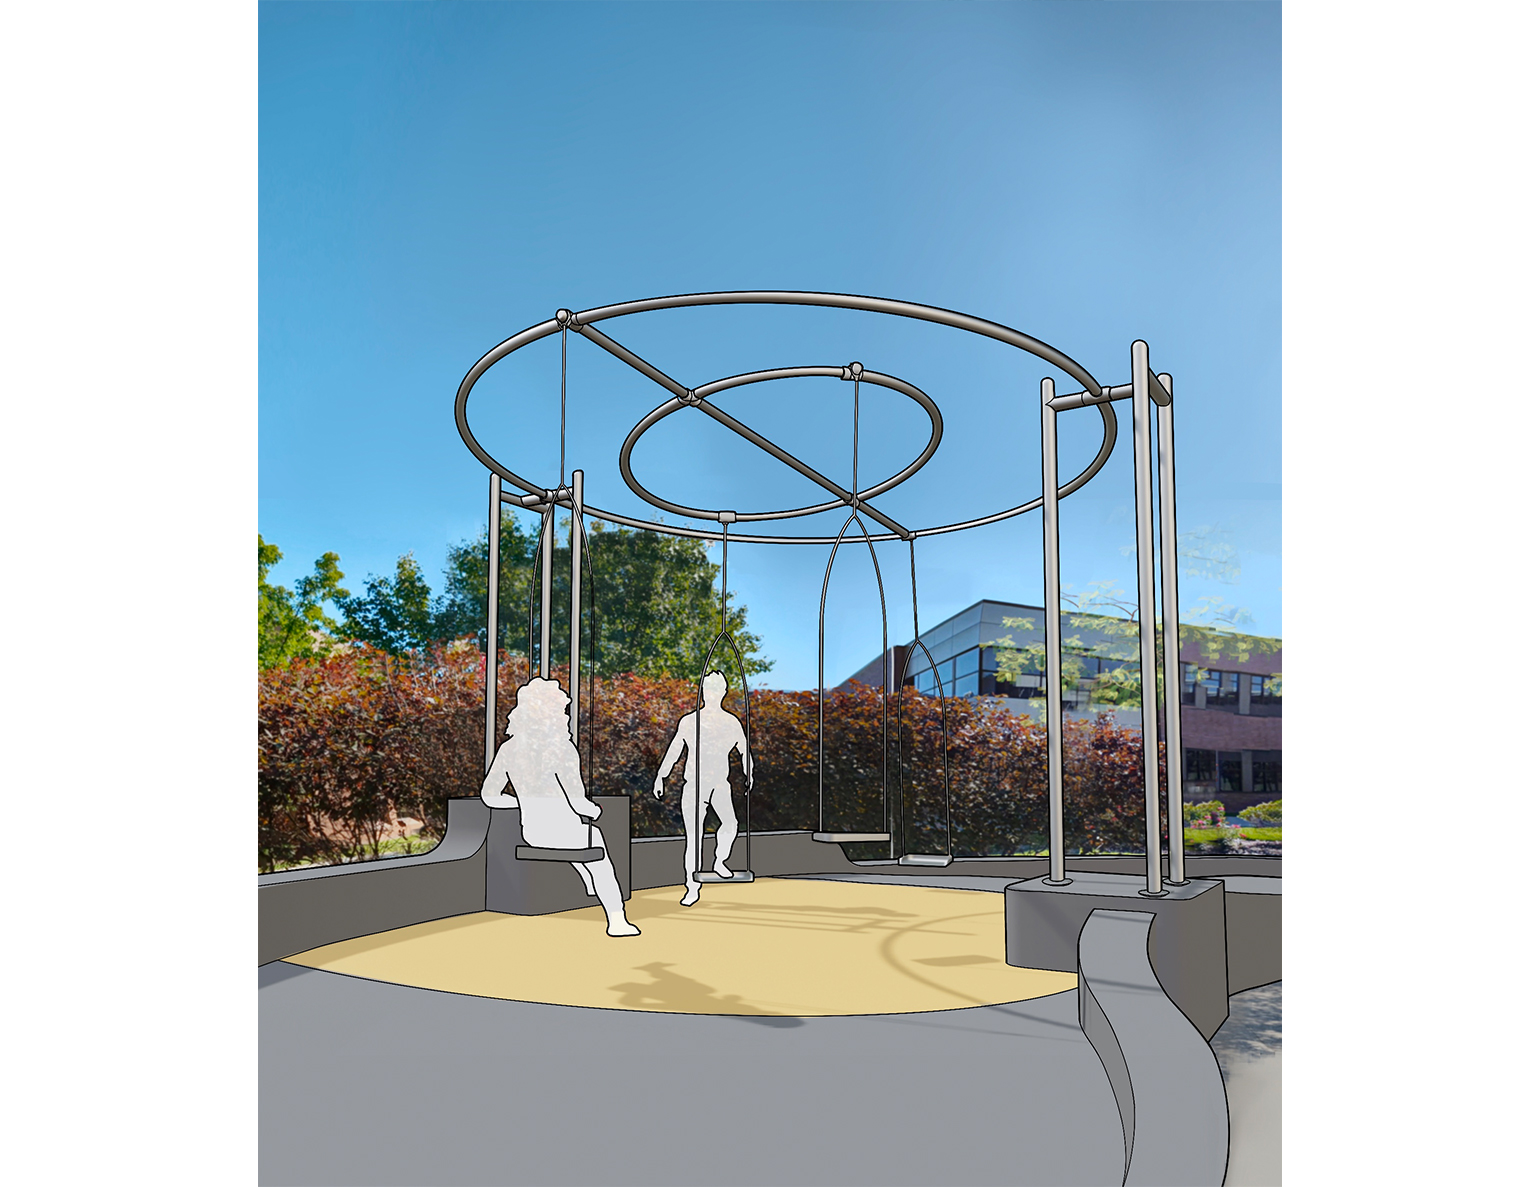 A digital sketch of a playground with swings and human outlines.